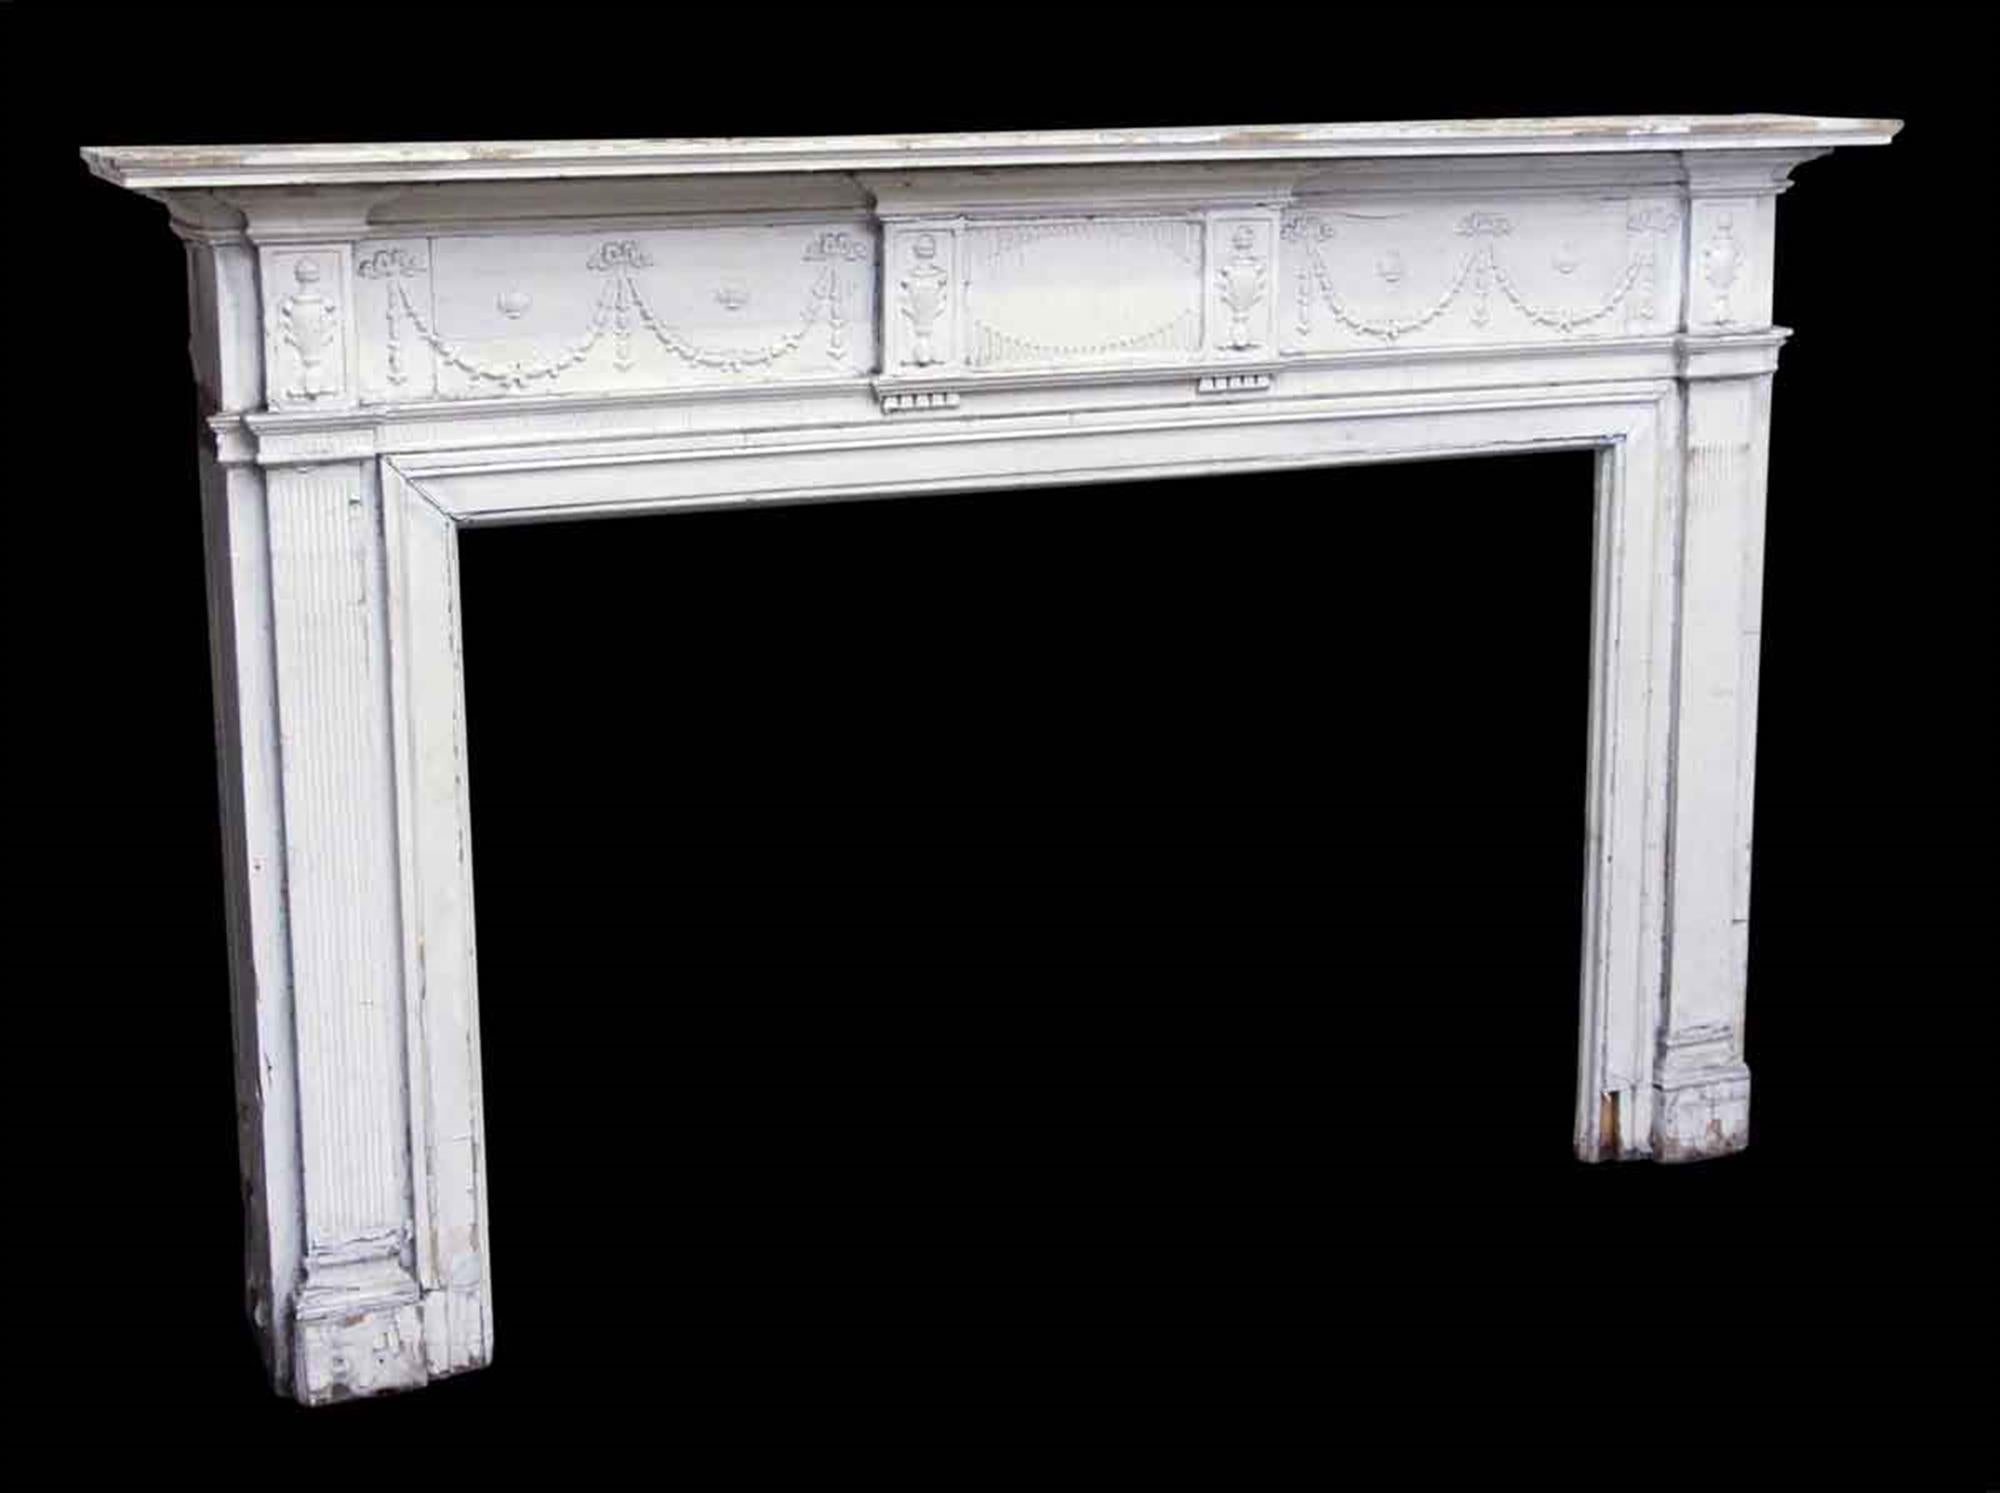 Federal style carved wood mantel with white crackle paint and garland design, circa 1900s. This can be seen at our 400 Gilligan St location in Scranton, PA.